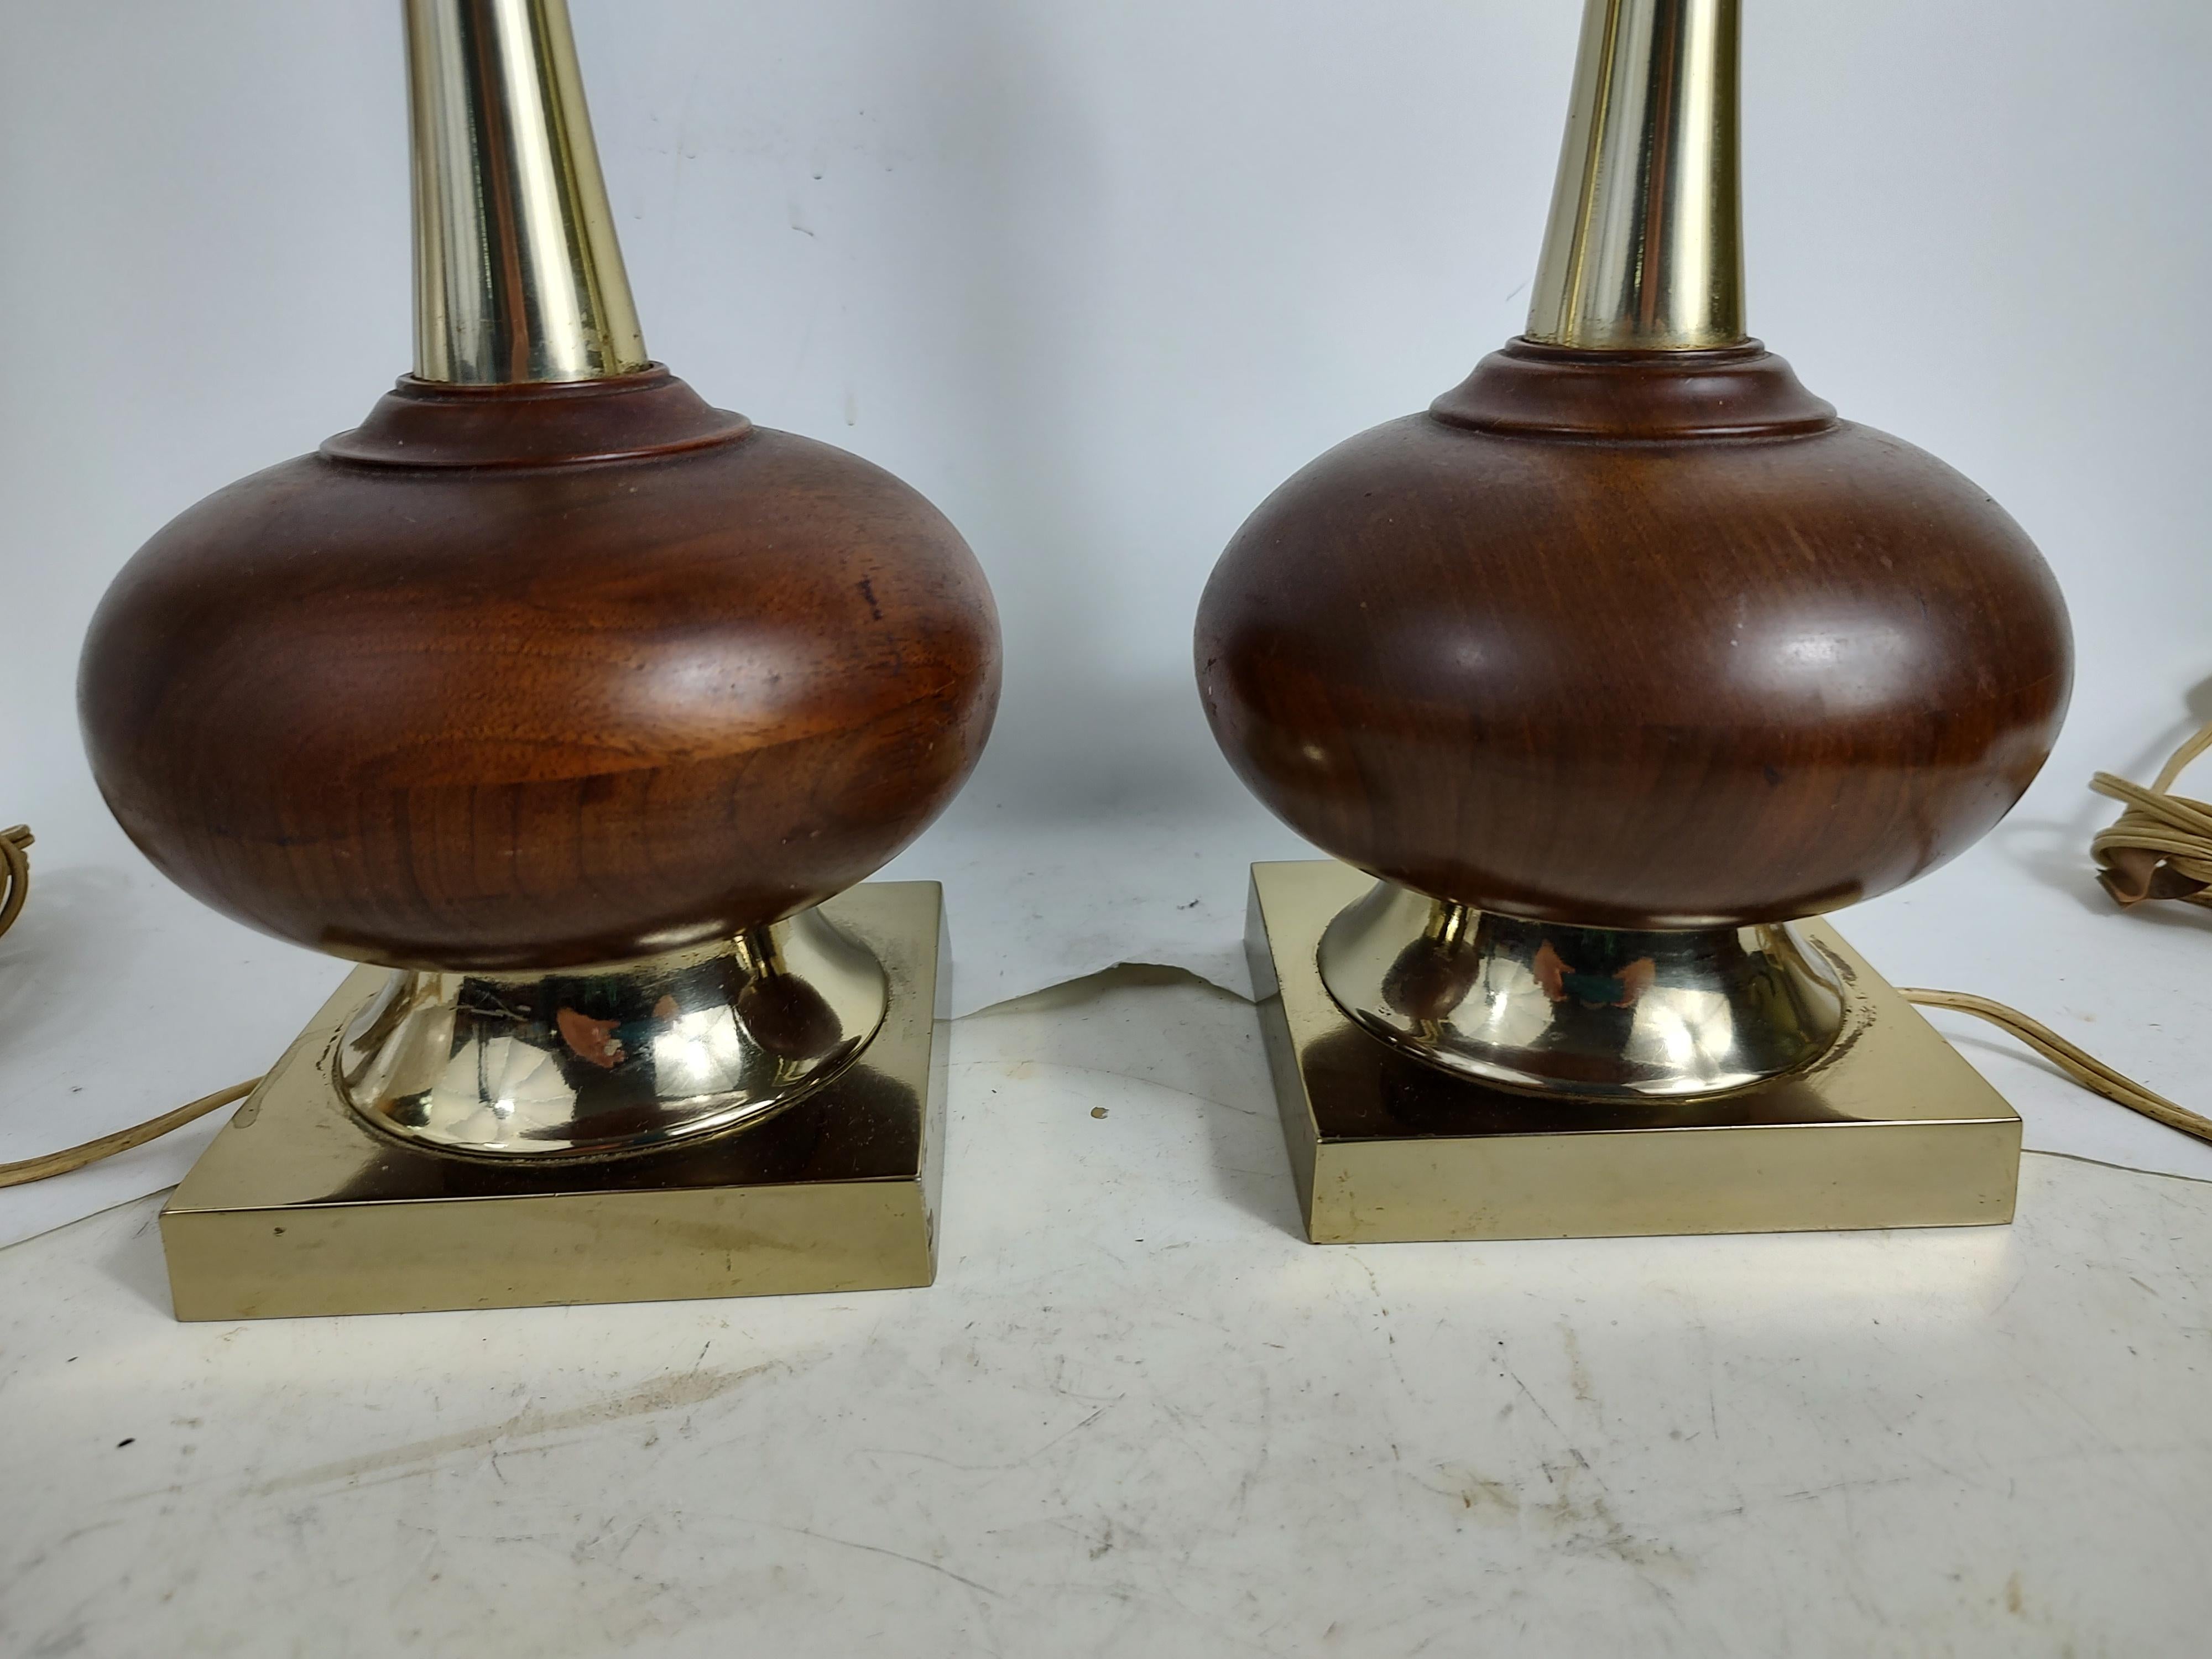 Fabulous pair of Mid-Century Modern Sculptural table lamps attributed to the Laurel Lamp Co. Tall slender necks supported by a squat walnut ball. In excellent vintage condition with minimal wear. Both lamps have touch sensors installed. Touch stems